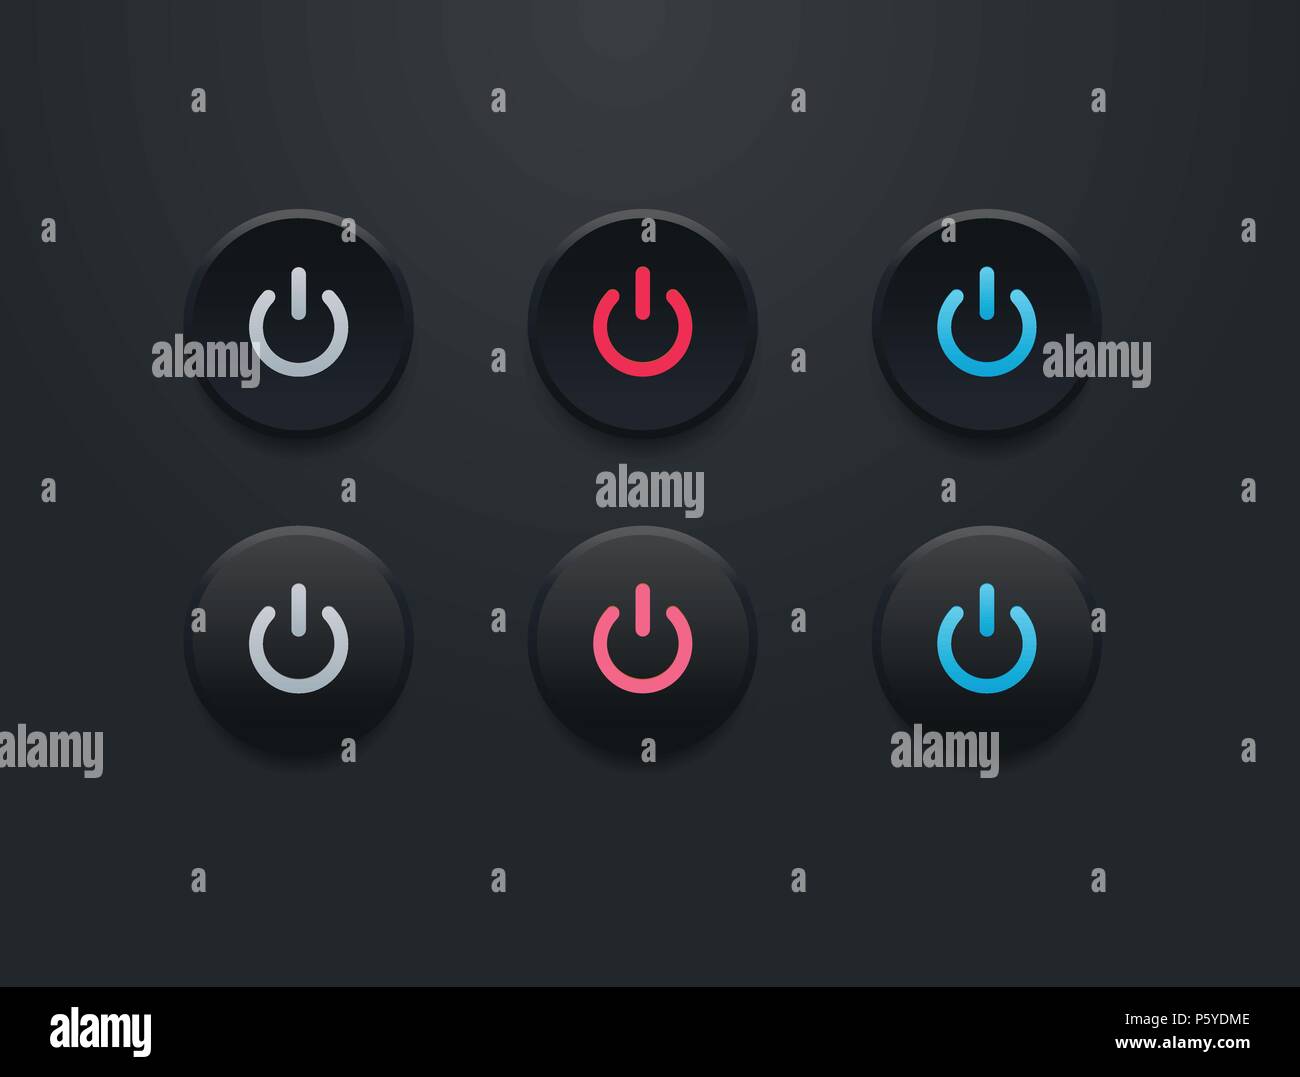 Power button icon set - simple flat design isolated on black background Stock Vector